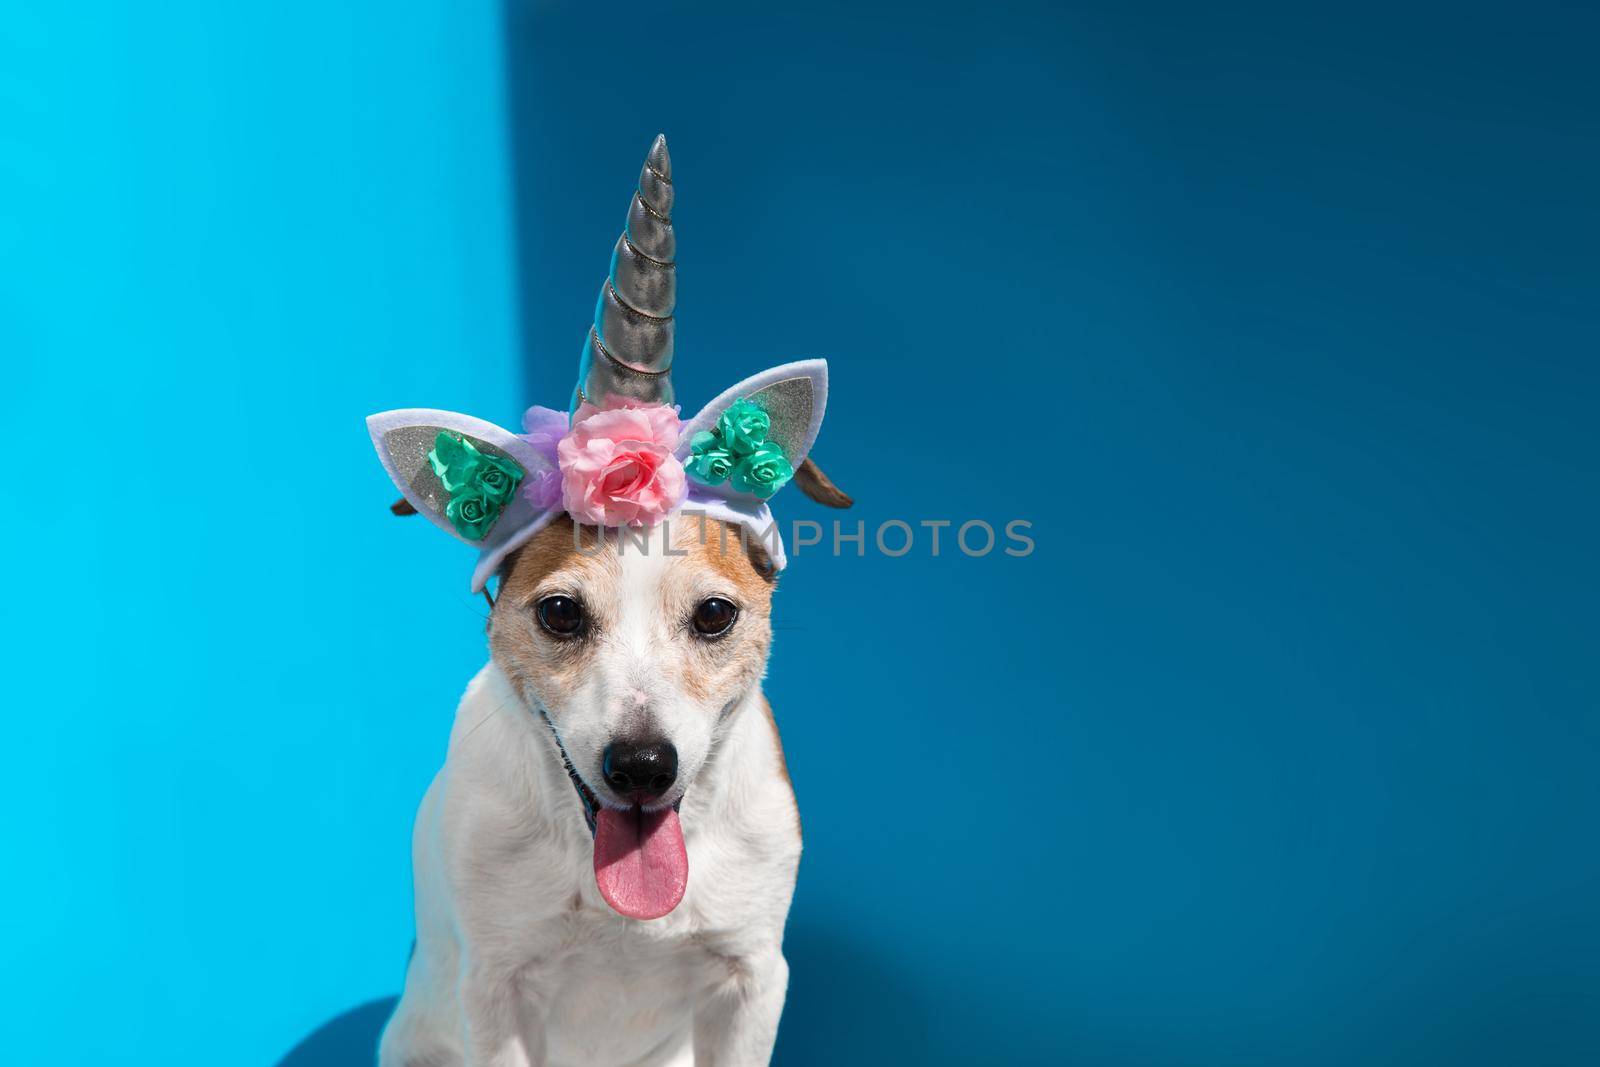 Cute Jack Russell terrier dog wearing headband with unicorn horn shows tongue out sitting on light blue background close view